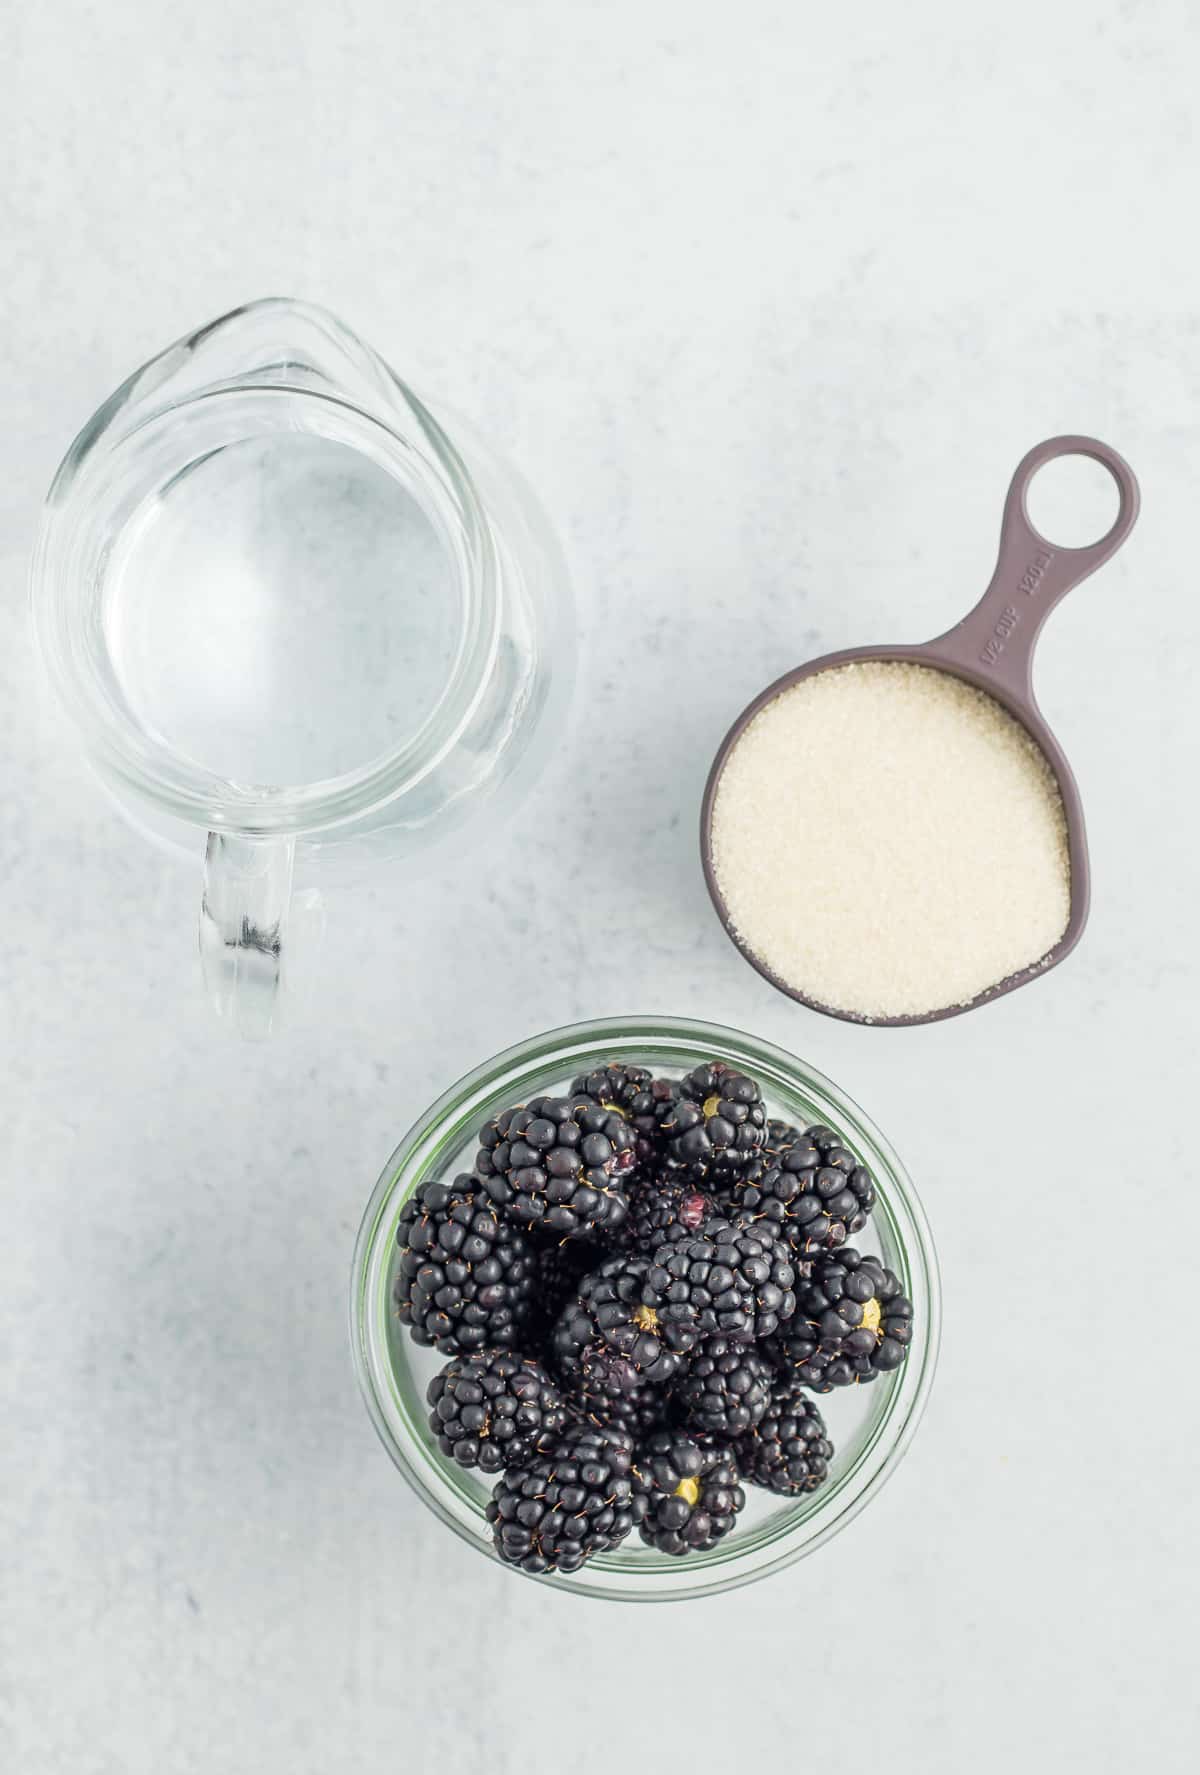 a pitcher of water, a measuring cup of sugar, and a bowl of blackberries.